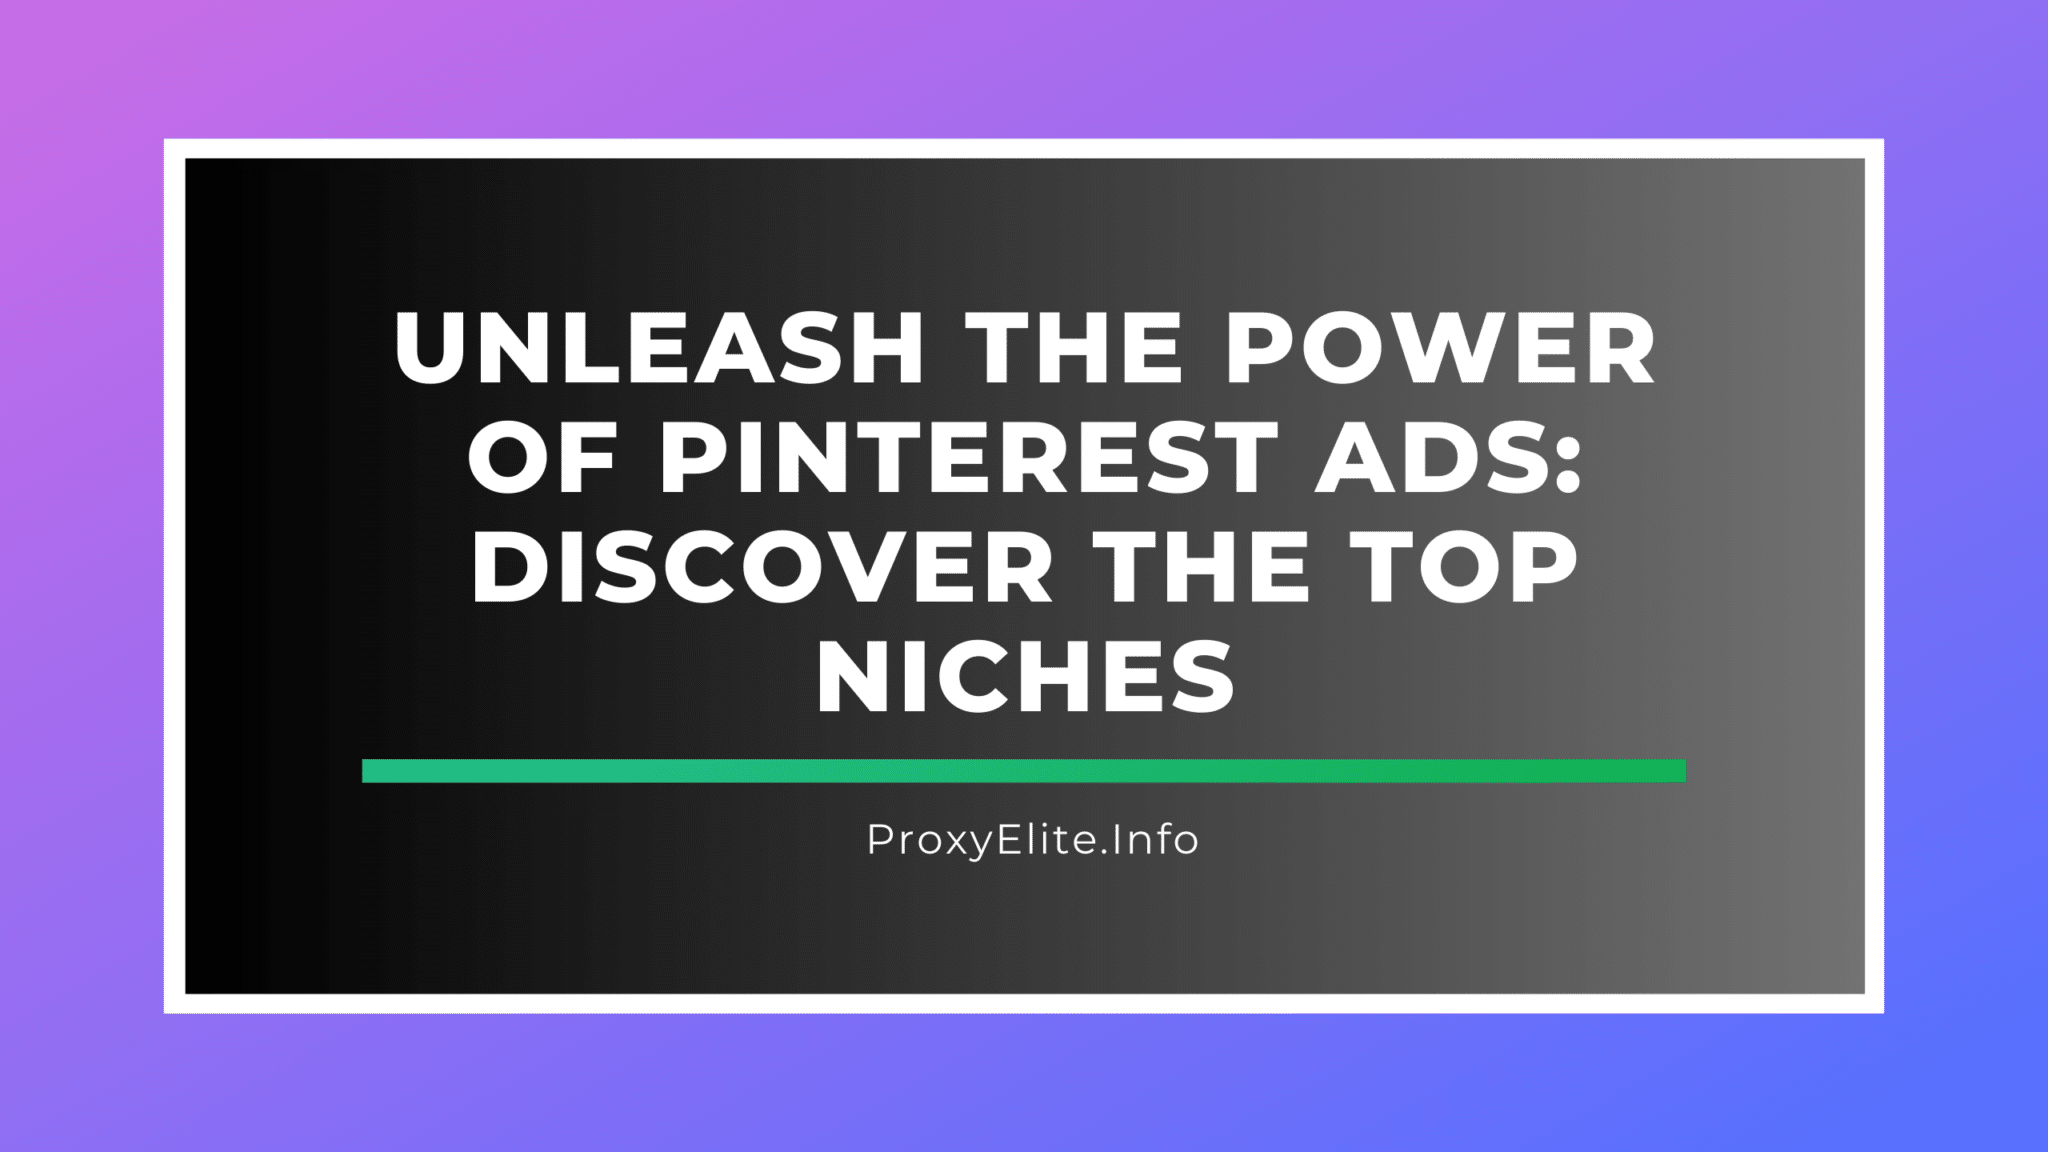 Unleash the Power of Pinterest Ads: Discover the Top Niches